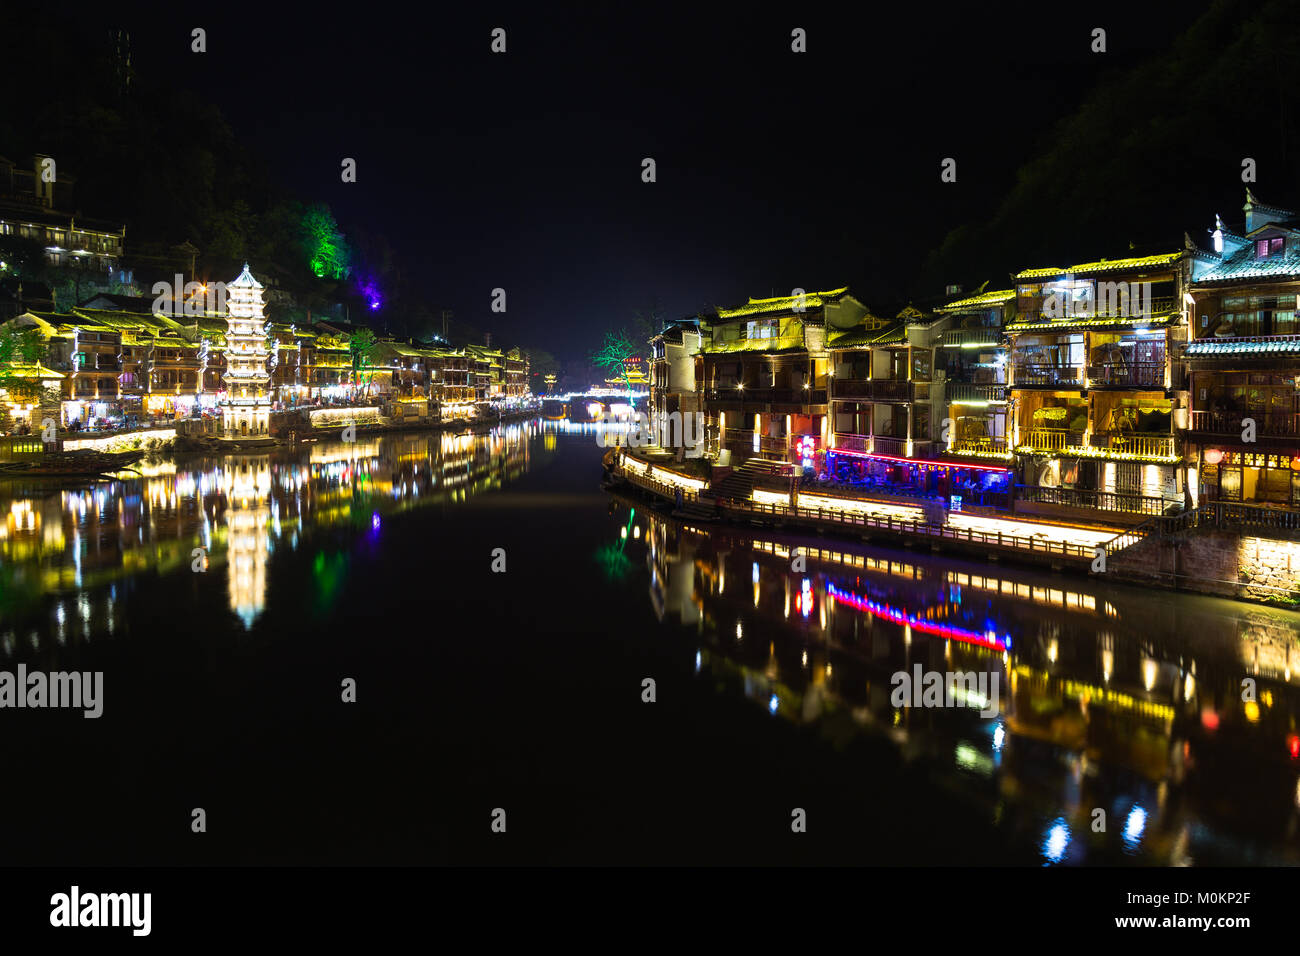 Night view of Fenghuang Ancient town, Hunan province, China. This ancient town was added to the UNESCO World Heritage Tentative List in the Cultural c Stock Photo